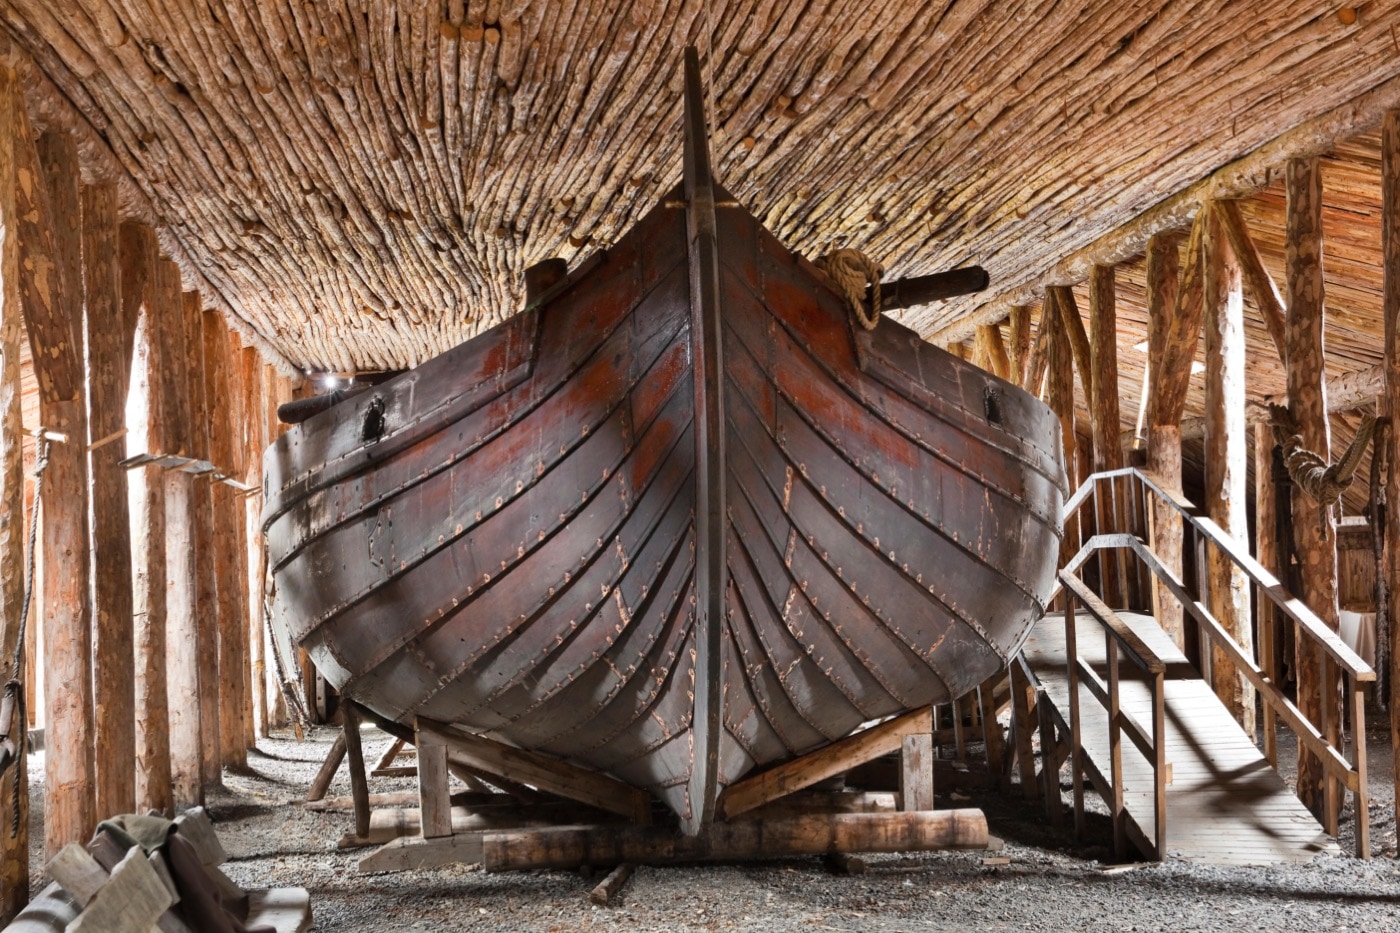 An imposing view of a viking ship's stern. The ships's layered wooden construction resembles an armadillo's shell